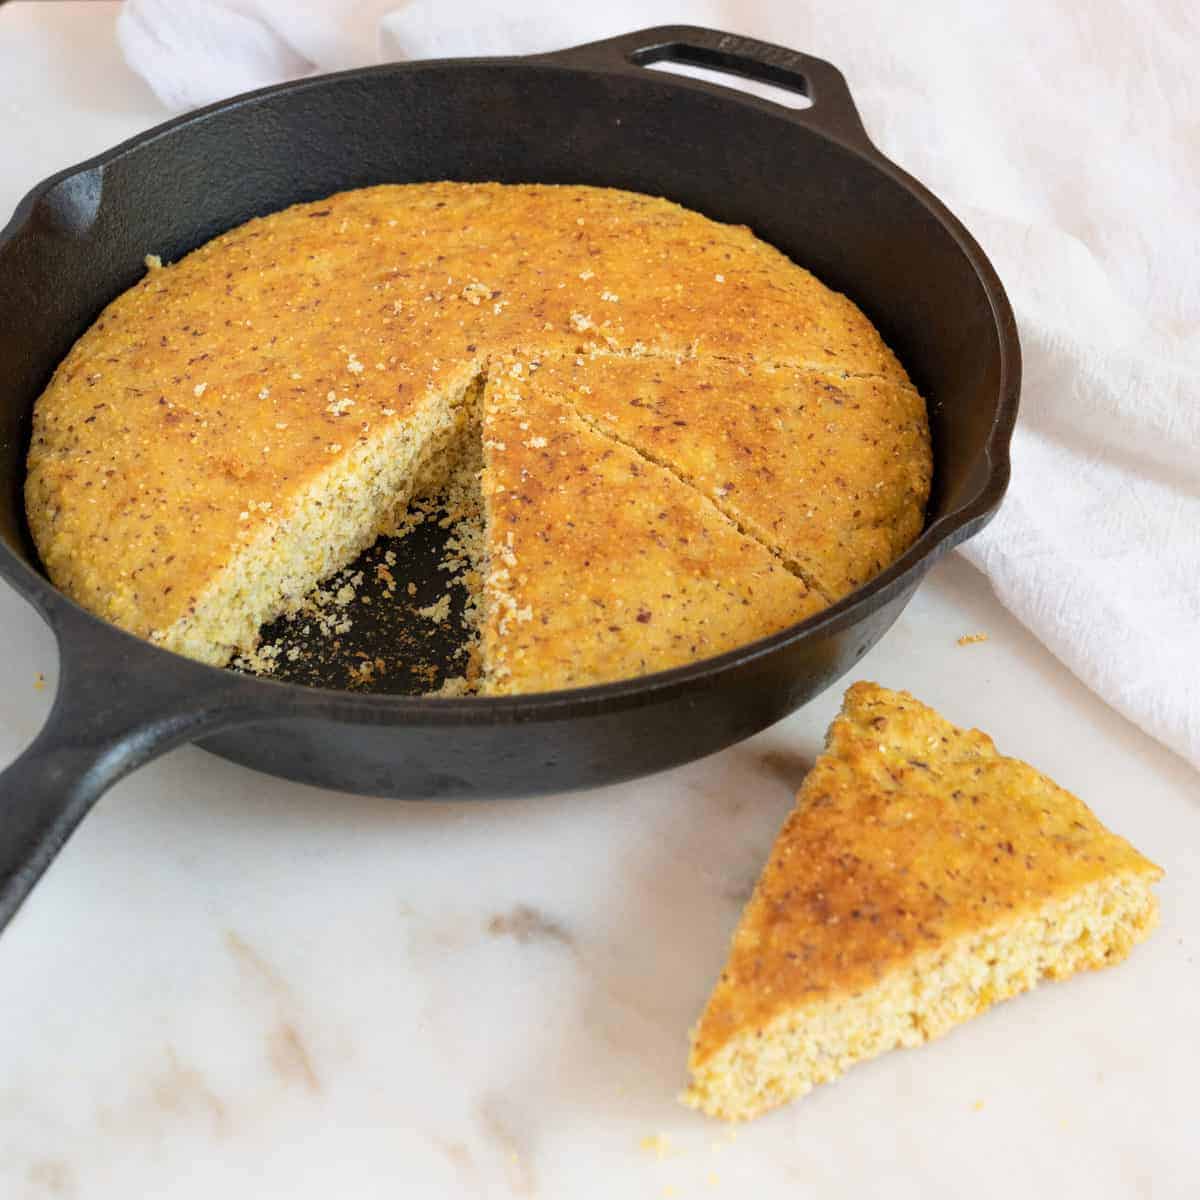 completed cornbread in skillet with one triangular piece on a white surface